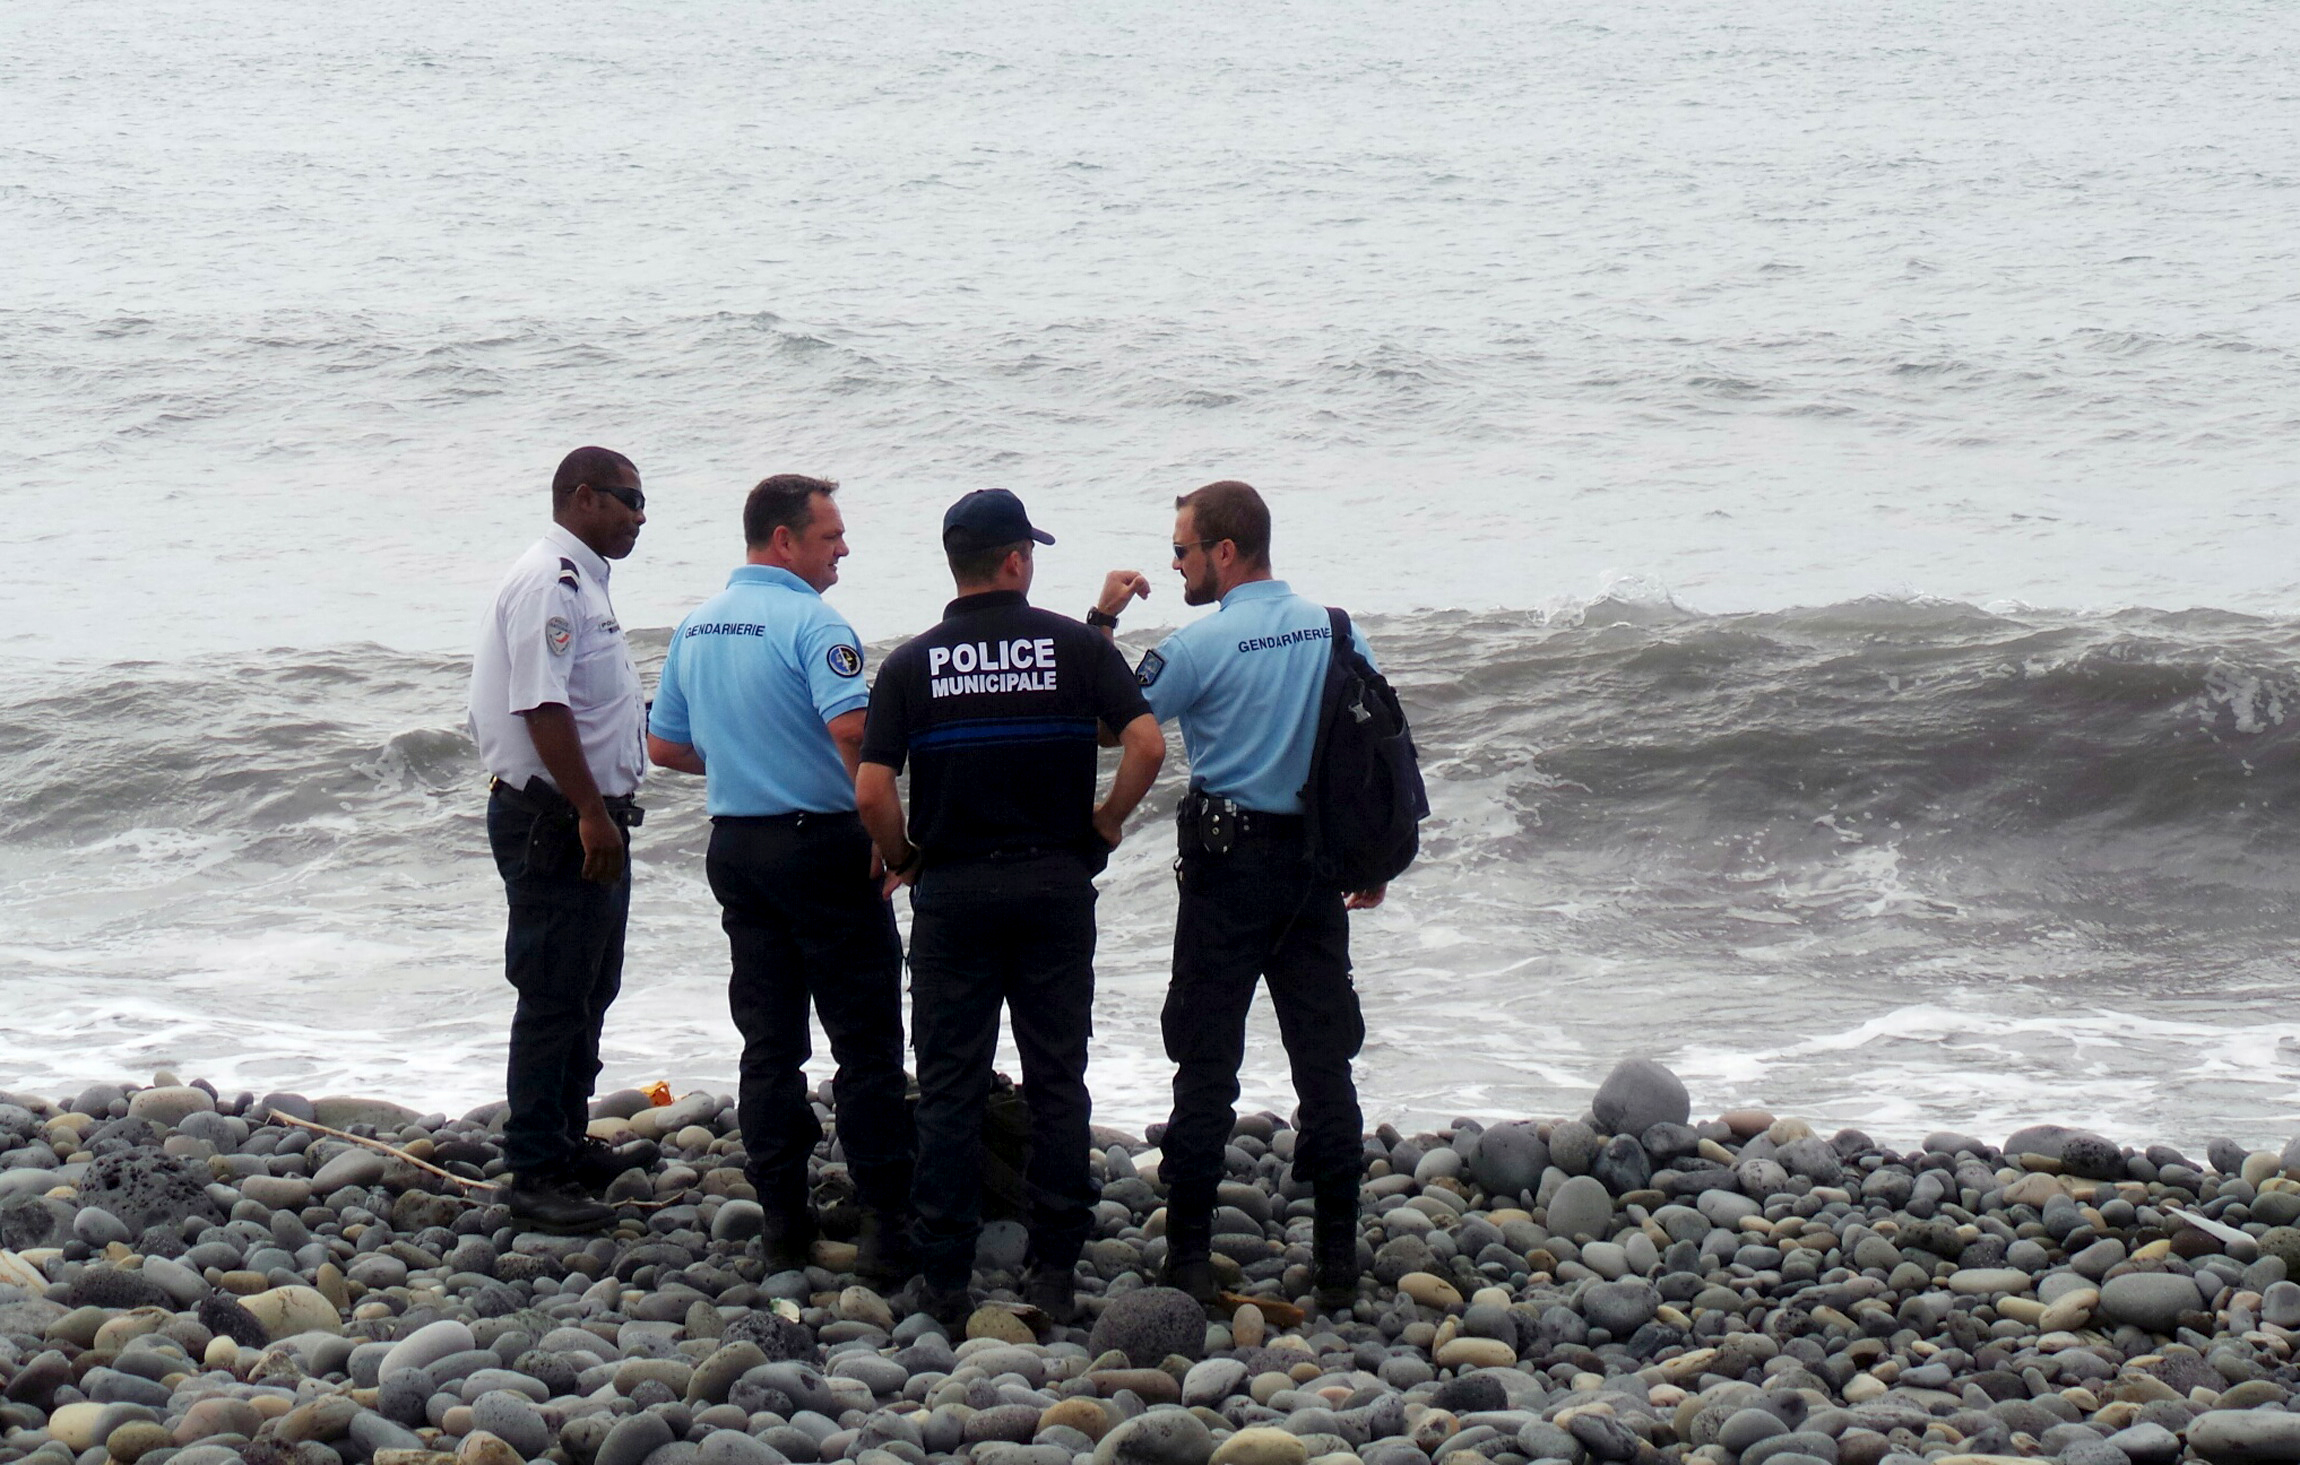 PHOTO: French gendarmes and police stand on the beach where a large piece of plane debris was found in Saint-Andre, on the French Indian Ocean island of La Reunion, July 29, 2015.